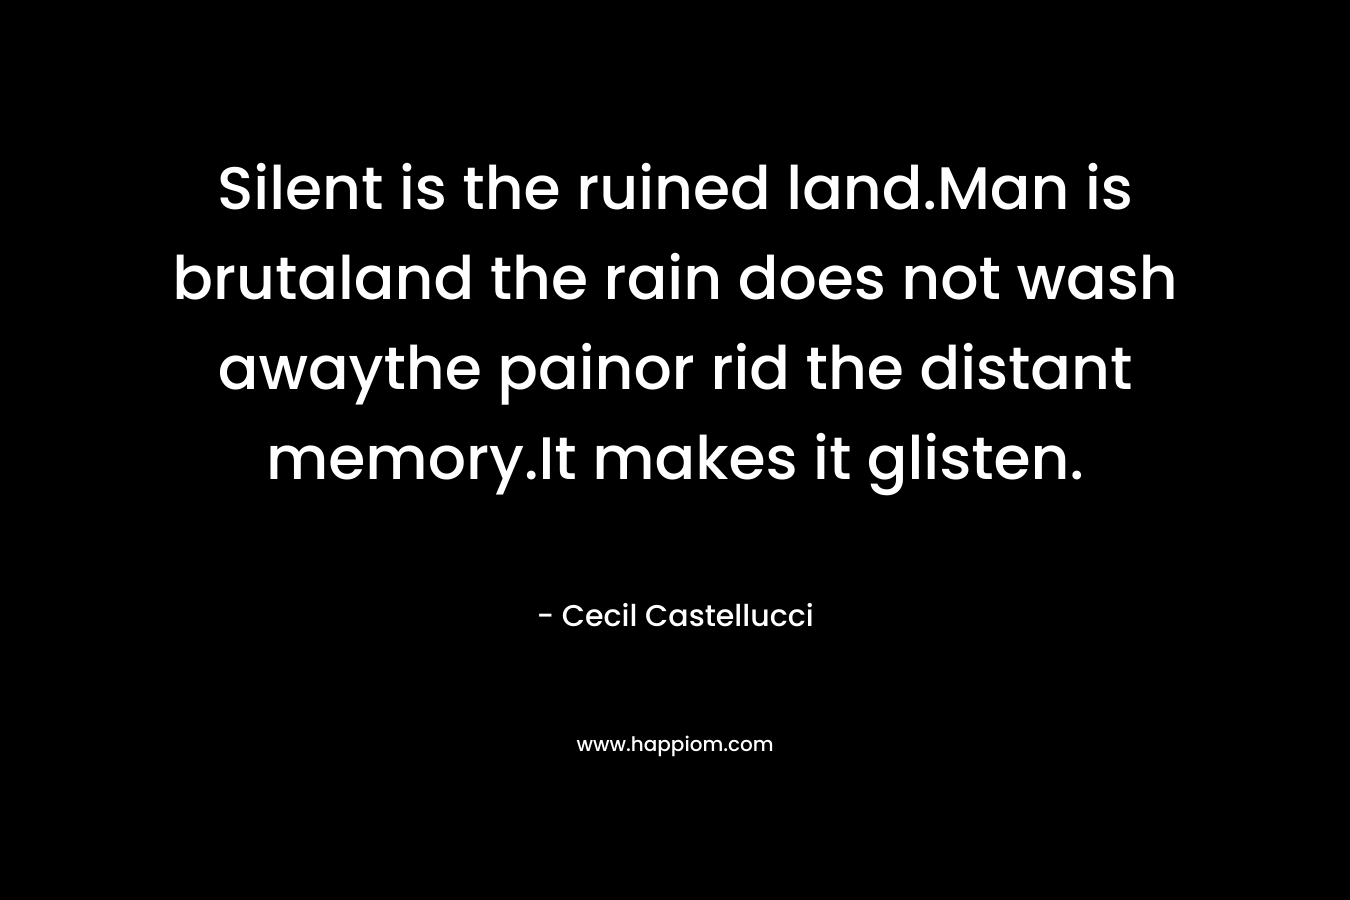 Silent is the ruined land.Man is brutaland the rain does not wash awaythe painor rid the distant memory.It makes it glisten. – Cecil Castellucci